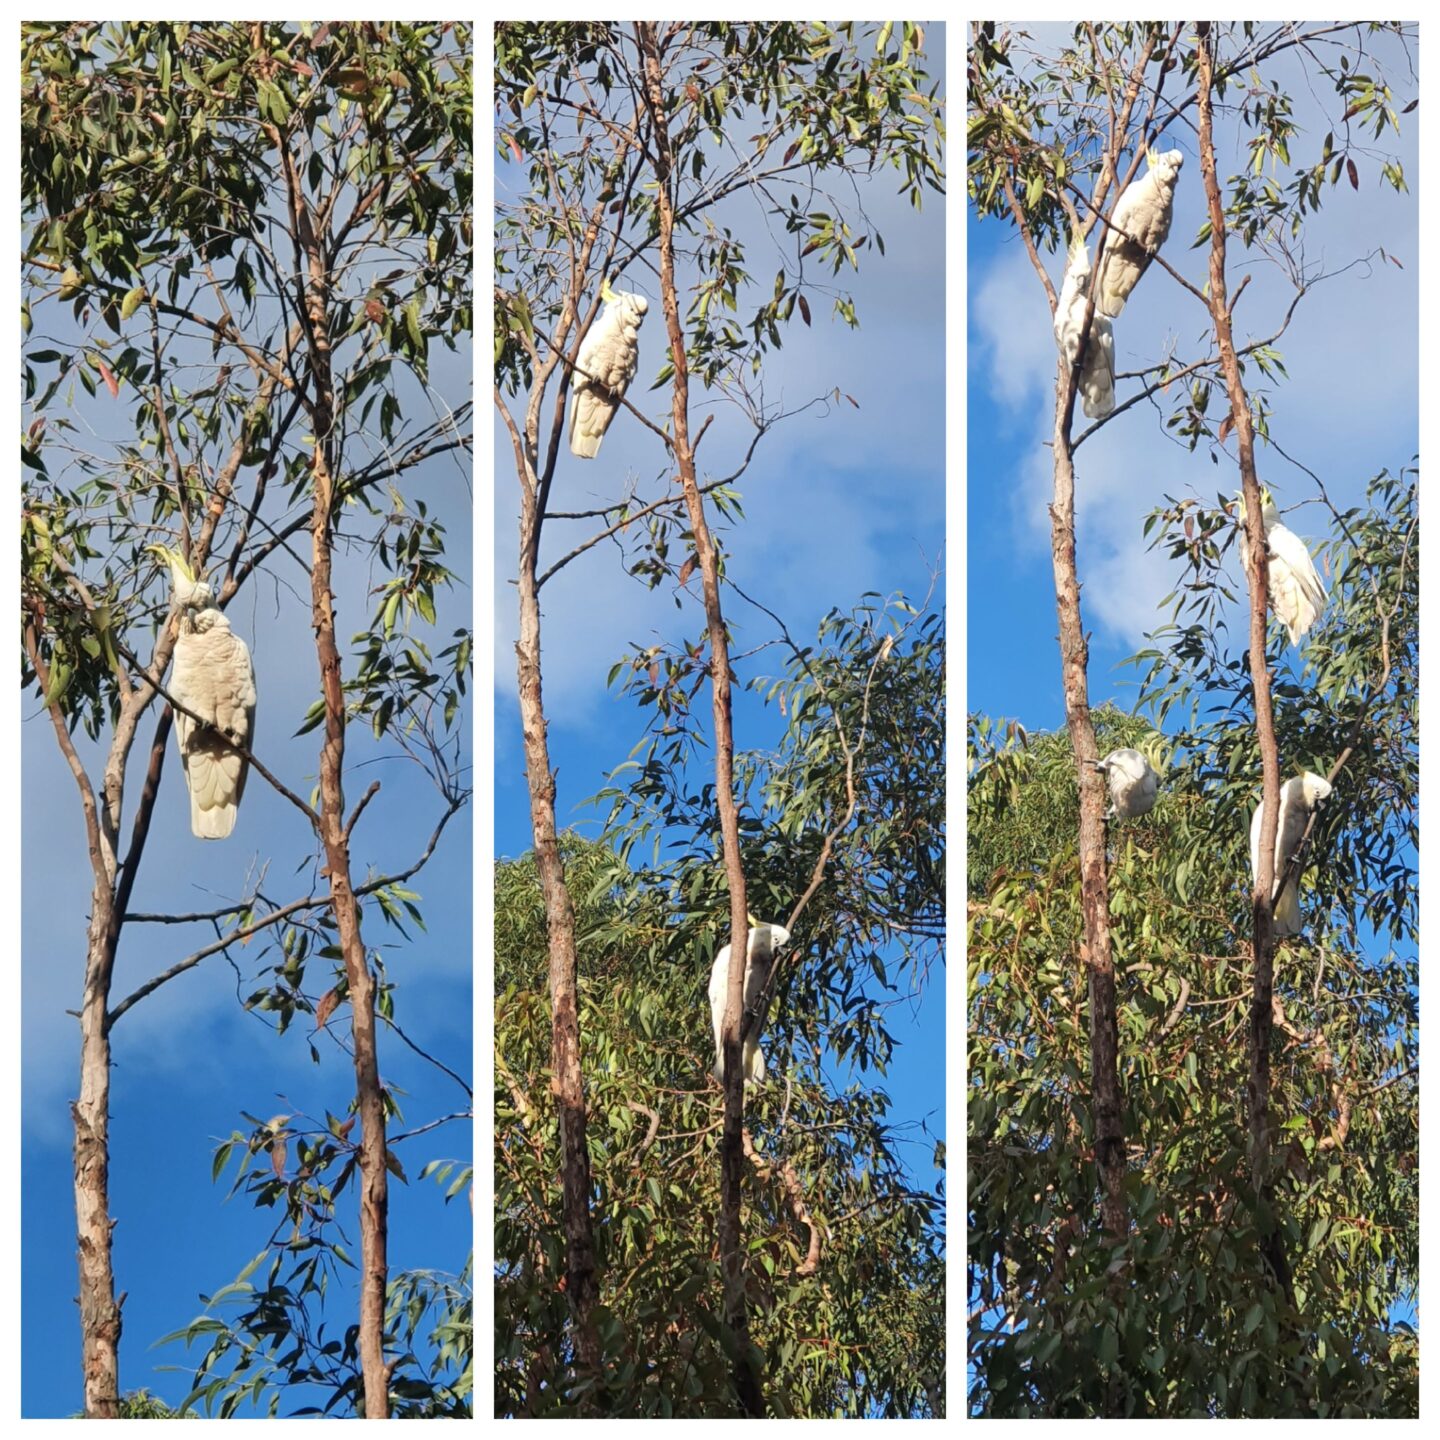 Three photos of cockatoos in gum trees collages together